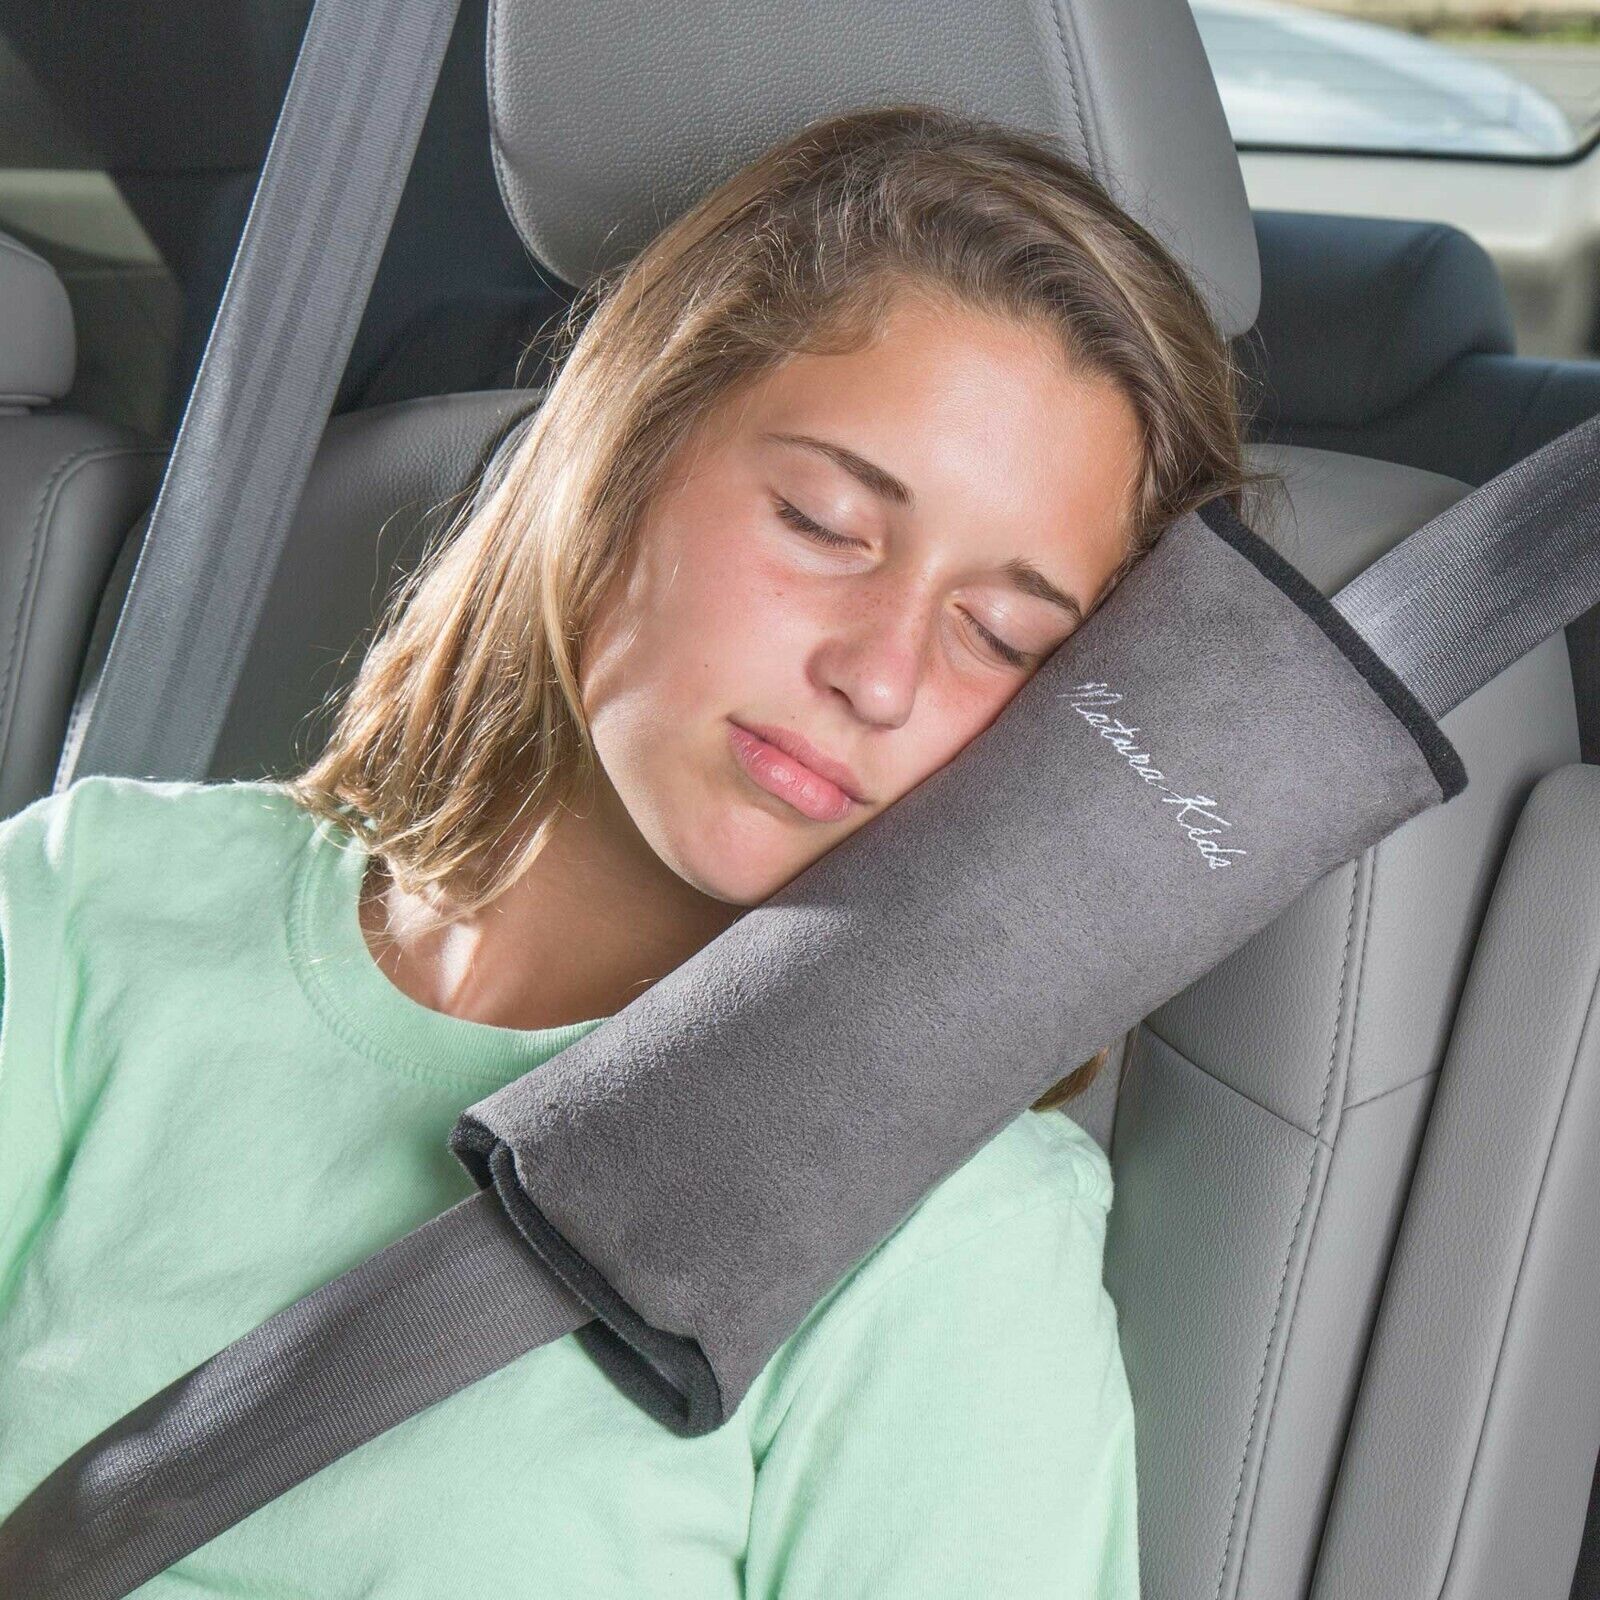 Baby Kids Neck Support Car Seat Belt Safety Neck Rest Pillow Pad Protector Natural Kids Does not apply - фотография #5